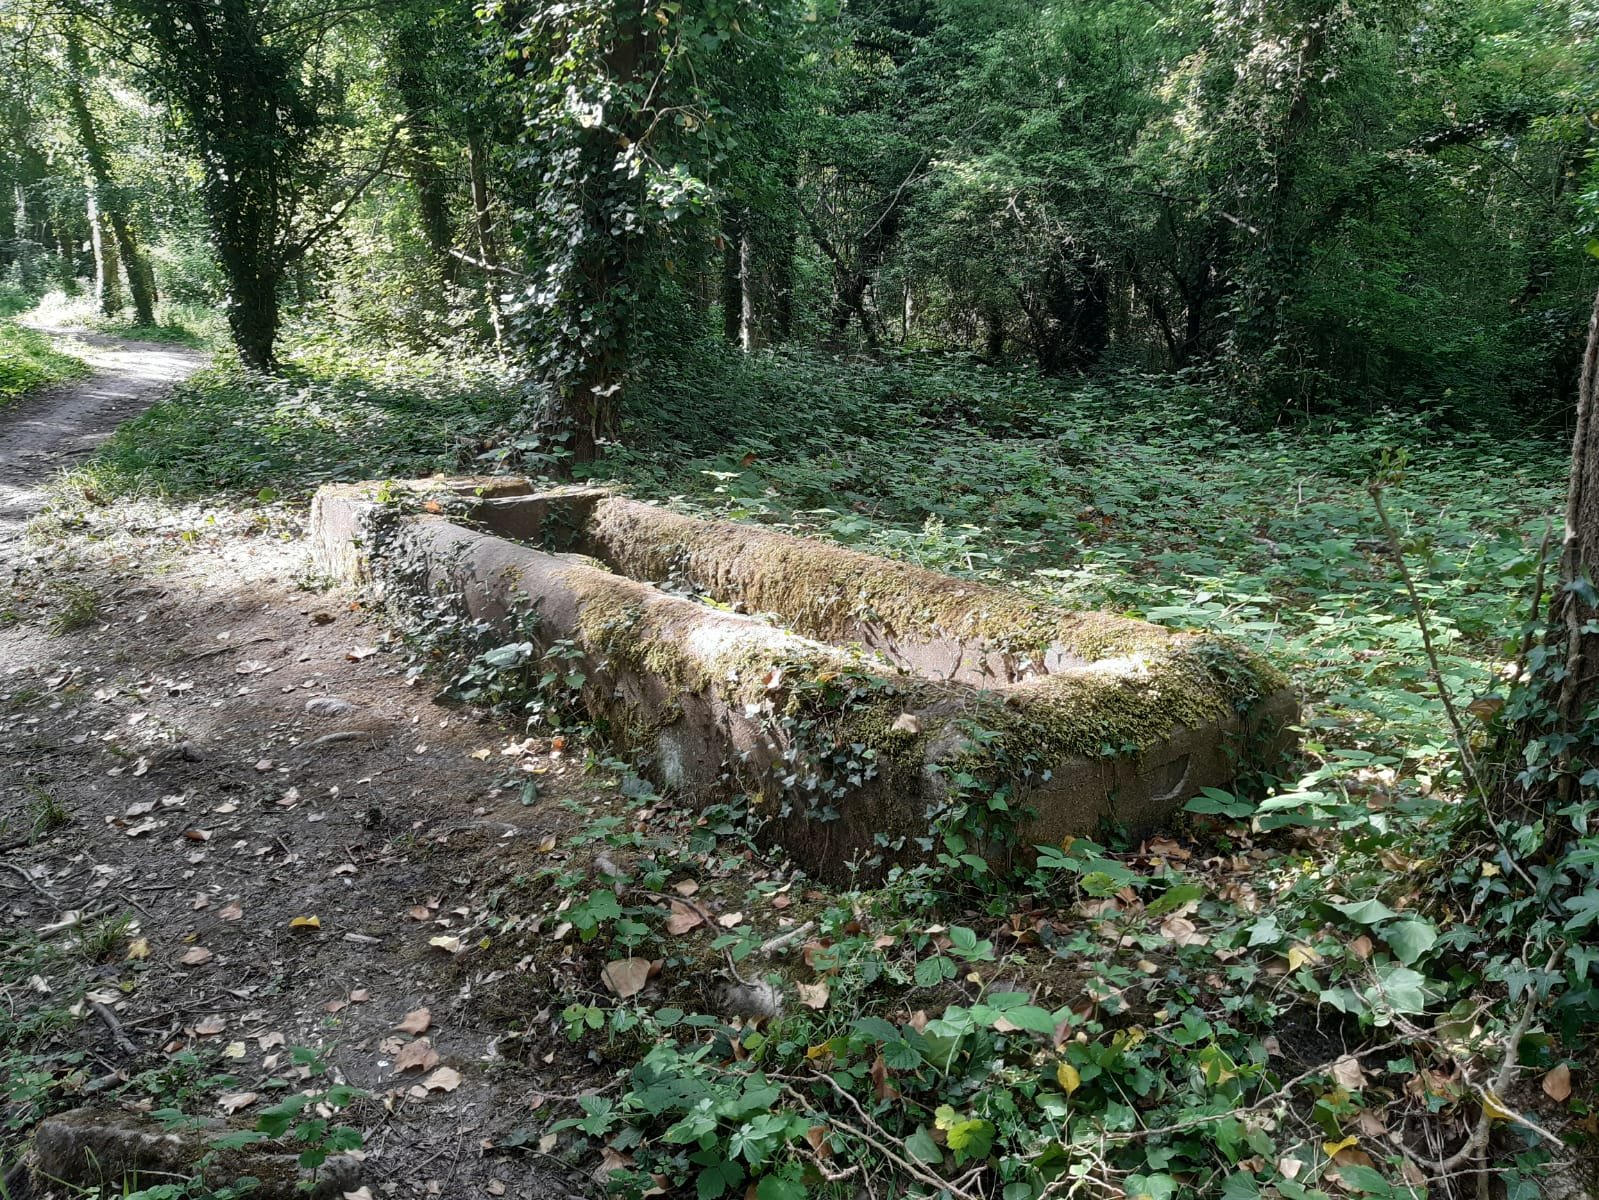 The horse trough once watered horses coming up the hill on the track from Bromley Common